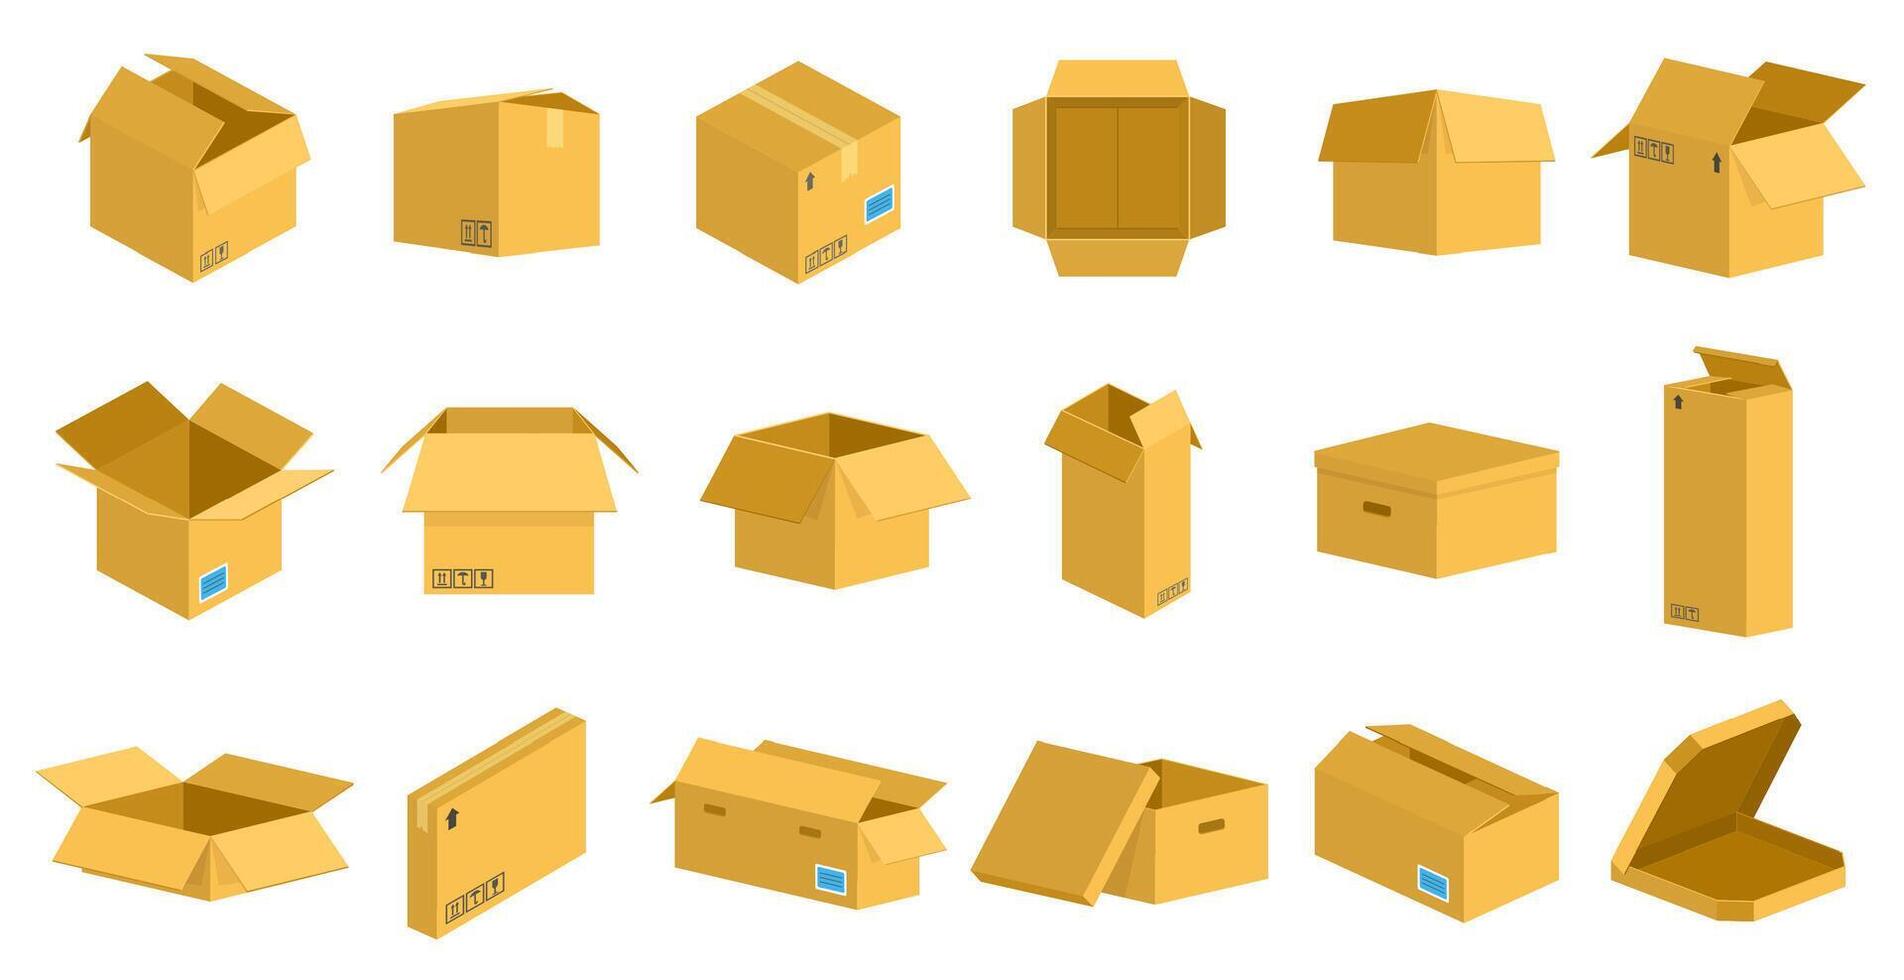 Storage cardboard boxes. Packaging delivery cardboard box, brown postal parcel package, open and closed recycling boxes vector illustration set